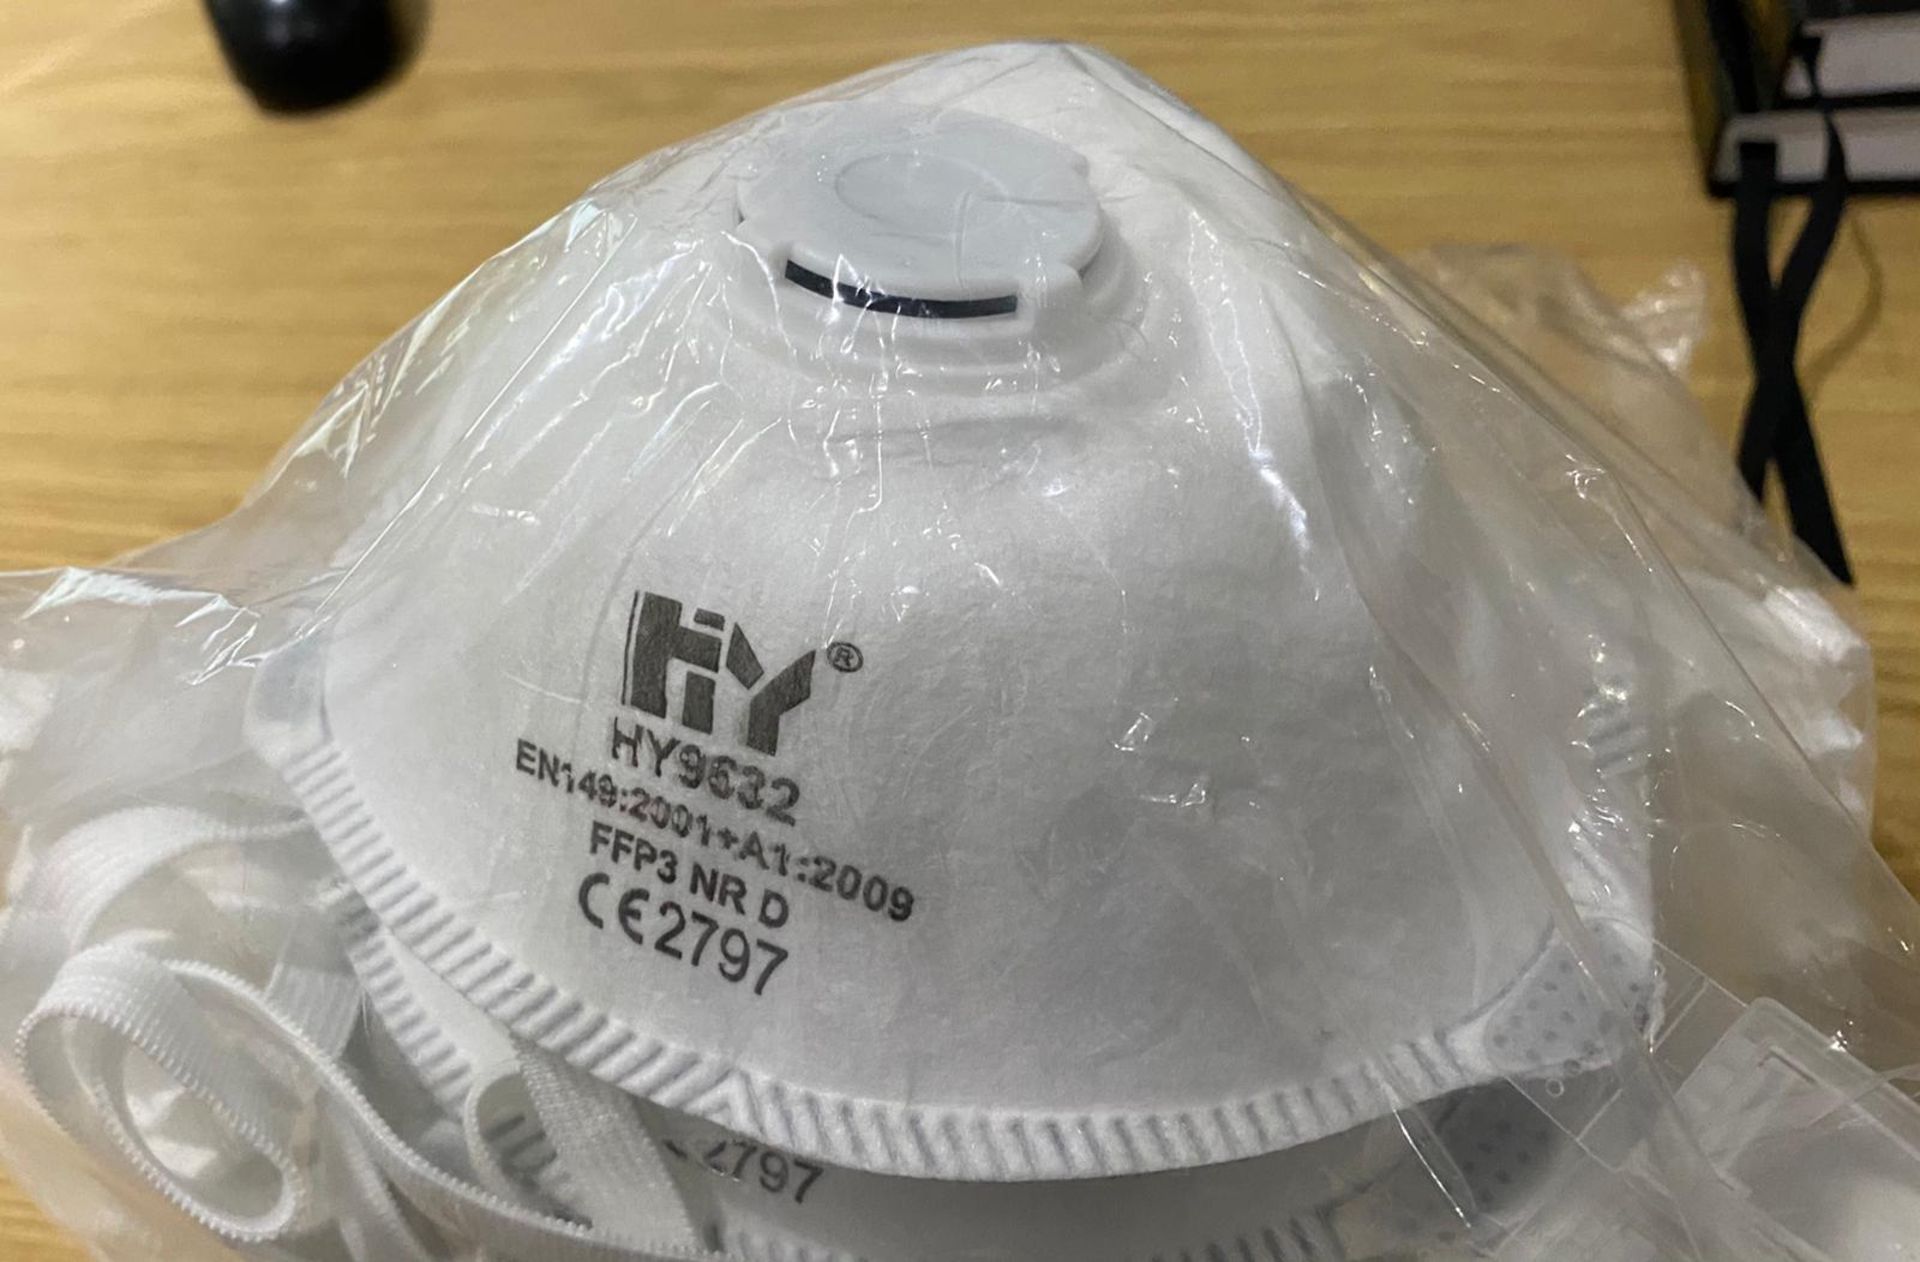 200 x Handanhy Fold Flat Disposable Face Masks With Exhalation Valves - Type HY8232 FFP3 - PPE - Image 3 of 5